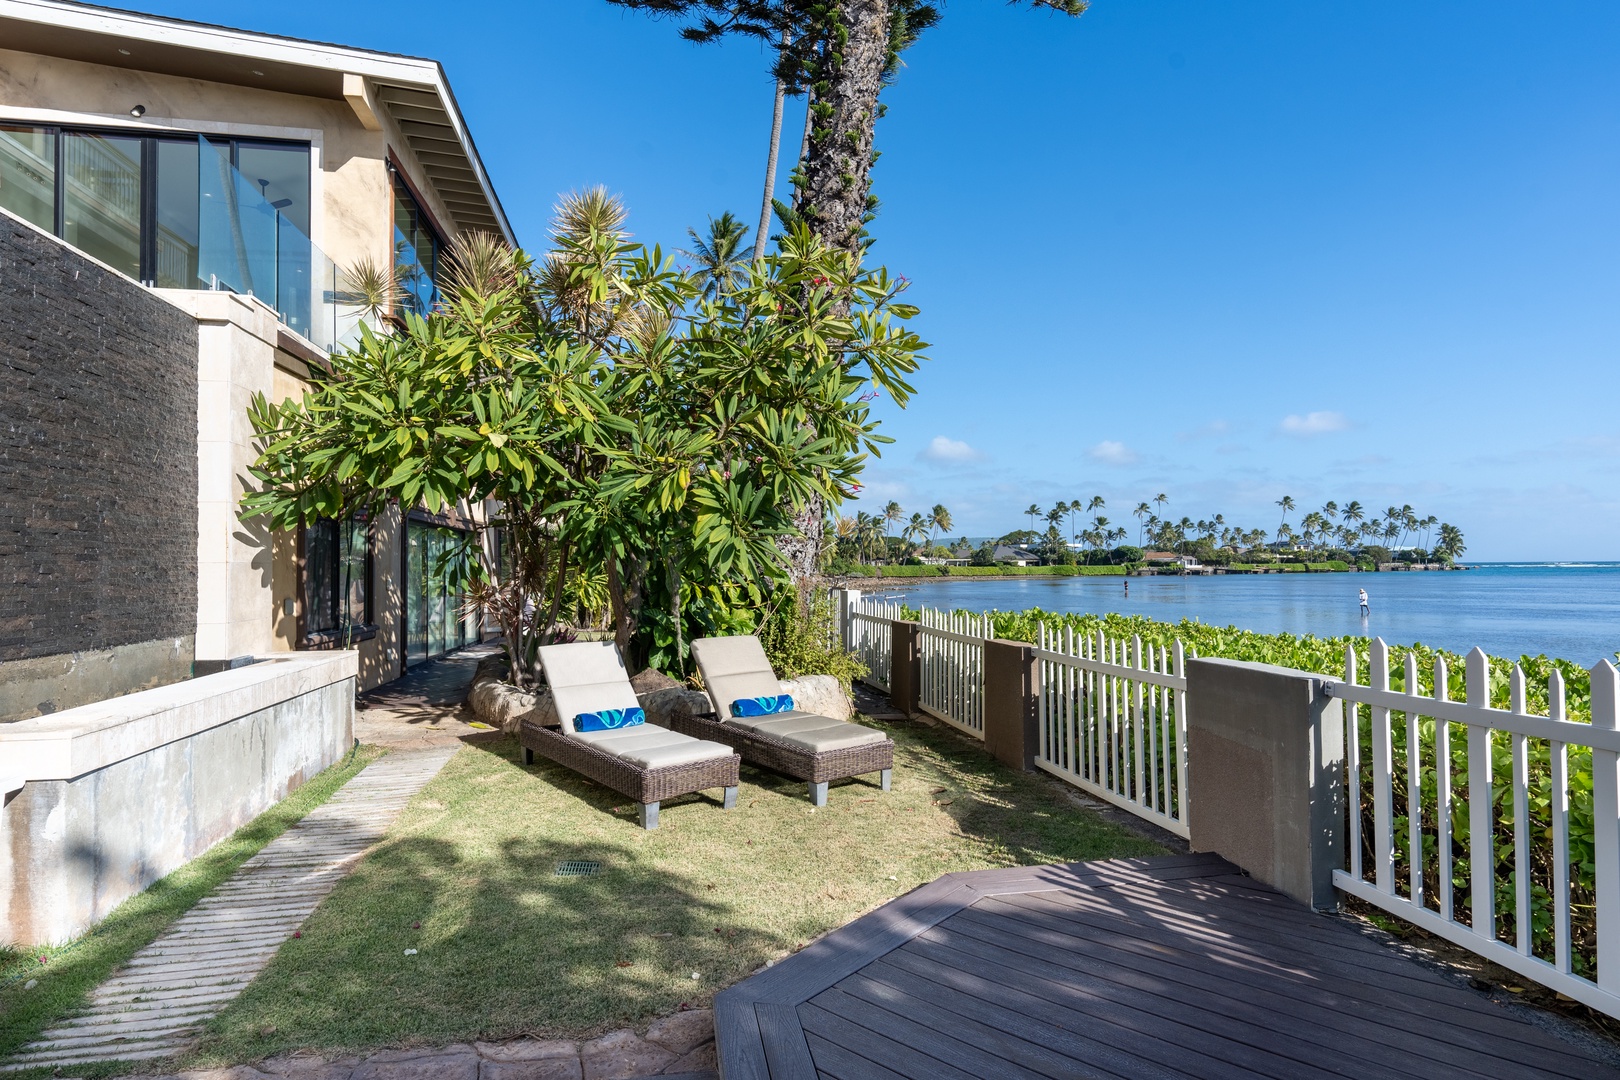 Honolulu Vacation Rentals, Wailupe Seaside - Be surrounded by tropical plants for tranquil moments.